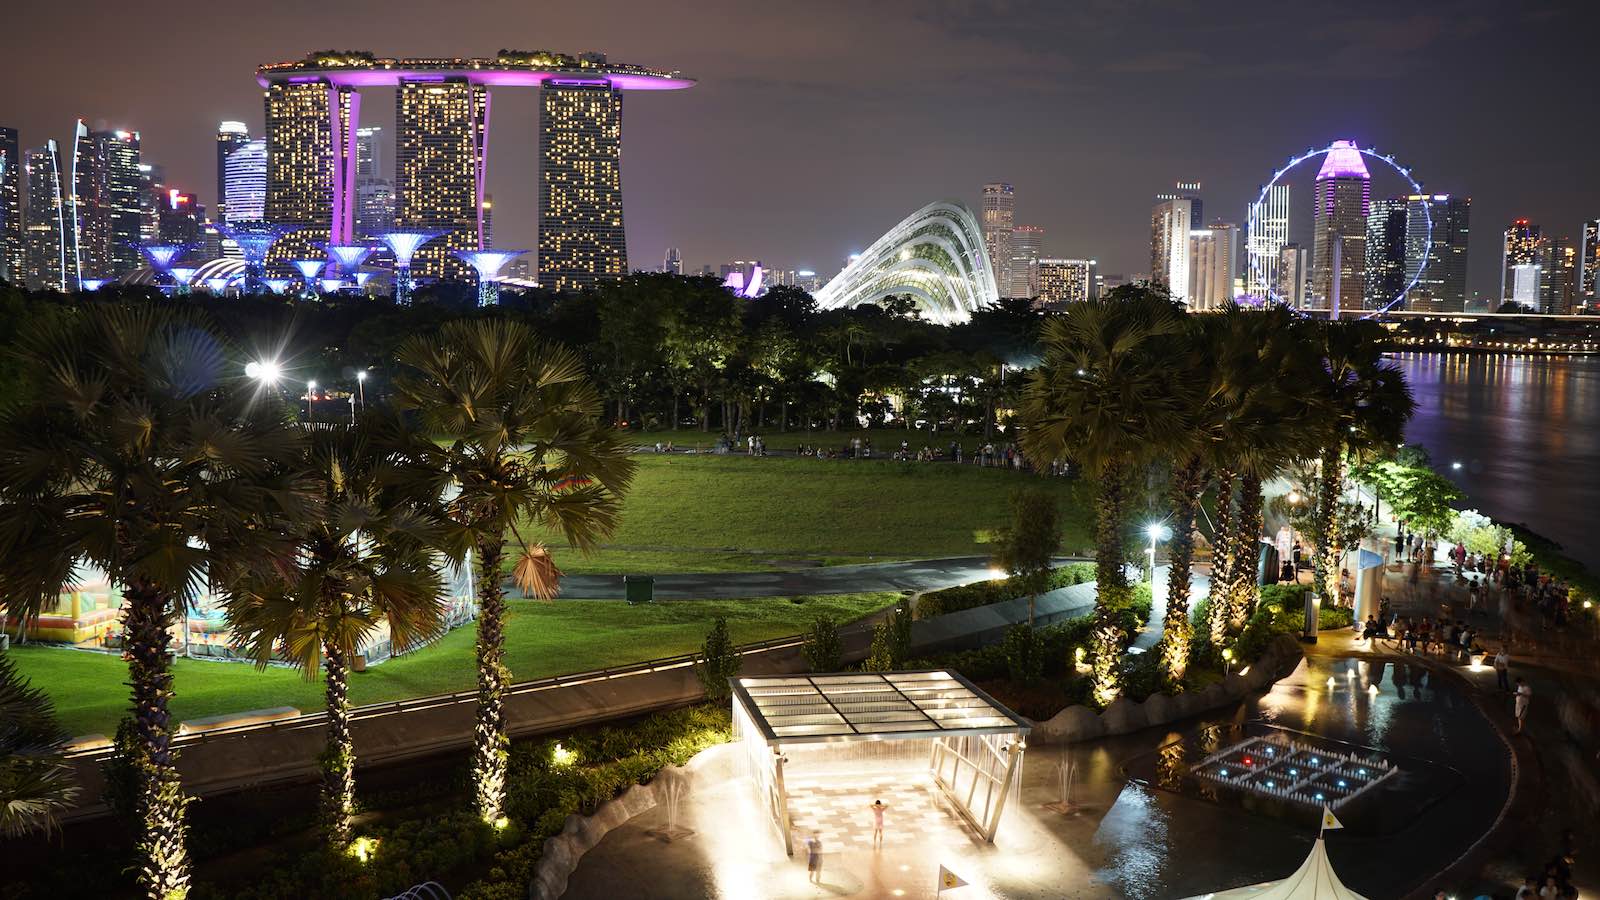 The picturesque Marina Bay Area in Singapore